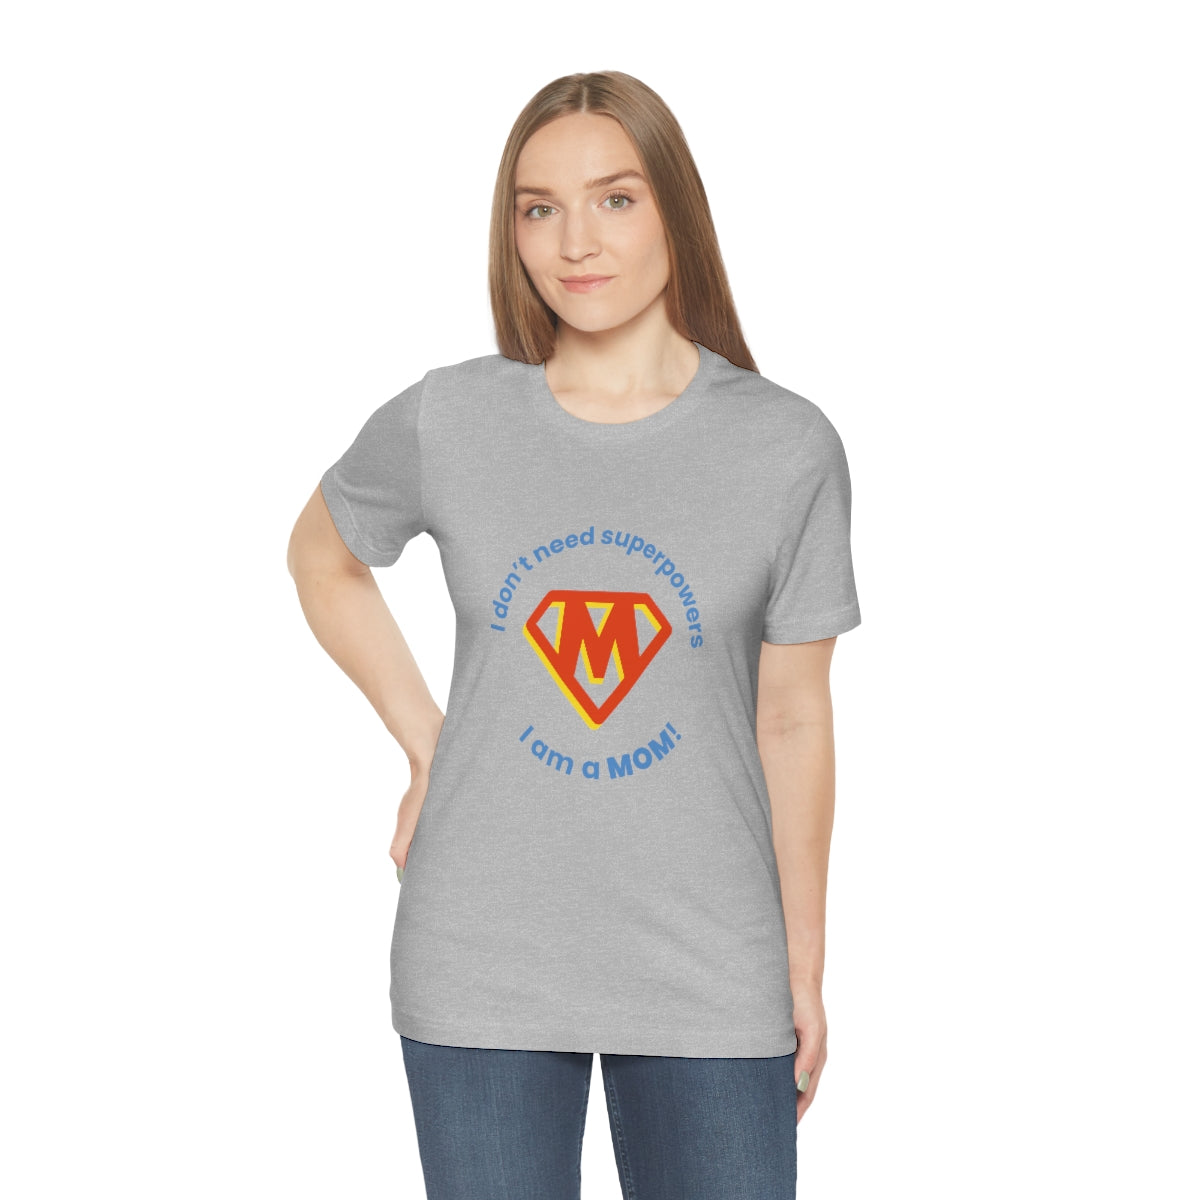 I Don't need superpowers,  I'm a mom - Funny Unisex Short Sleeve Tee - CrazyTomTShirts